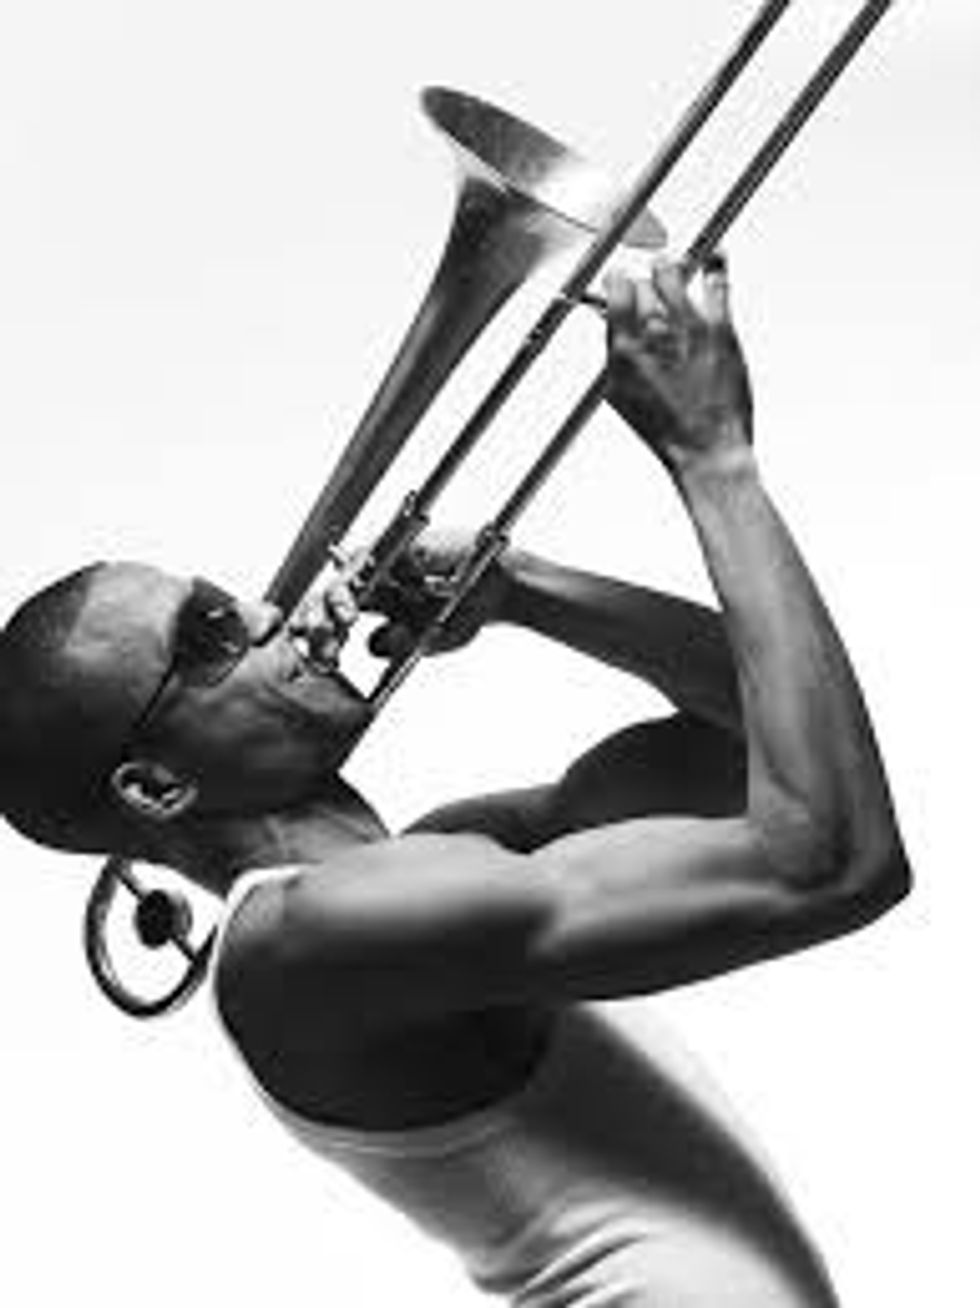 Young Musician Robbed at Gunpoint -- Trombone Shorty Replaces Stolen Instrument